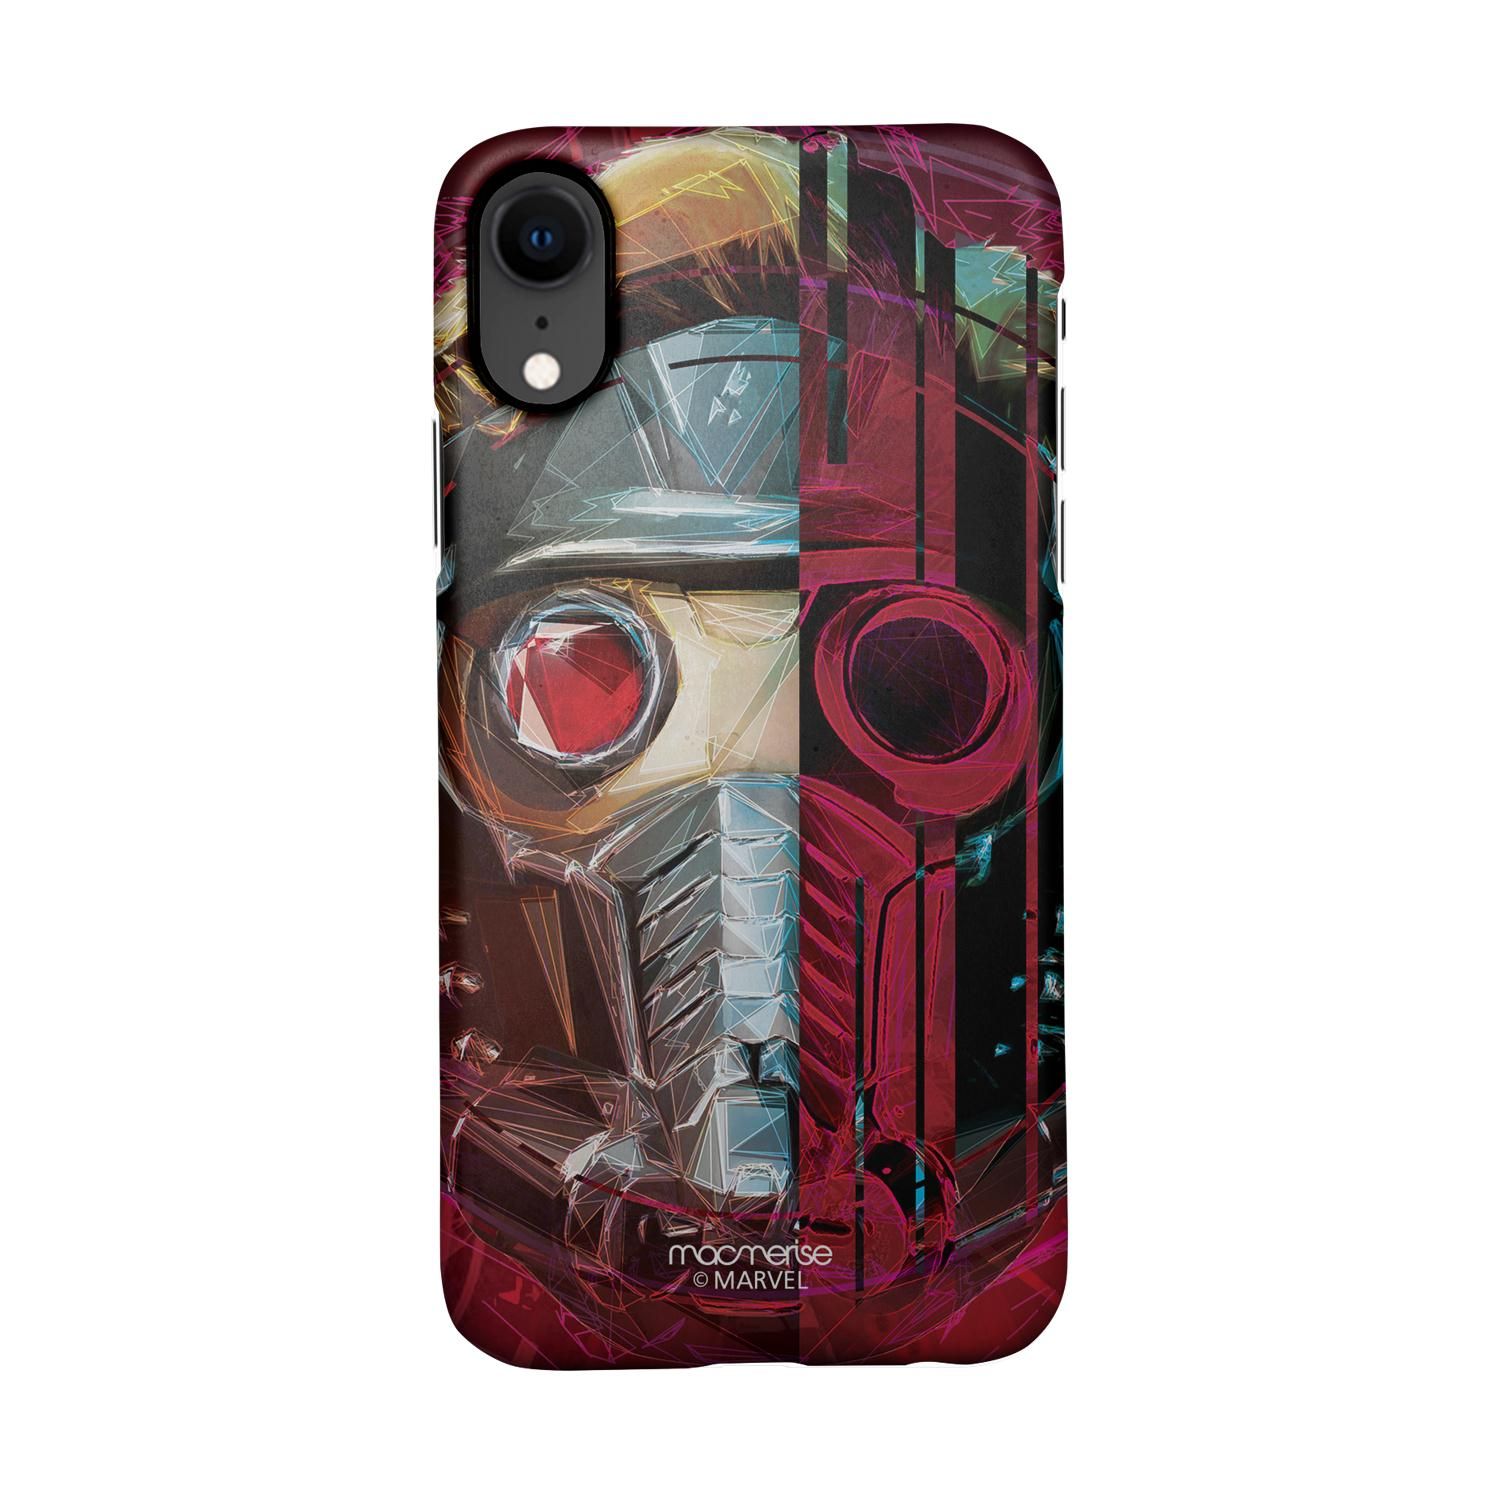 Buy Grunge Suit StarLord - Sleek Phone Case for iPhone XR Online